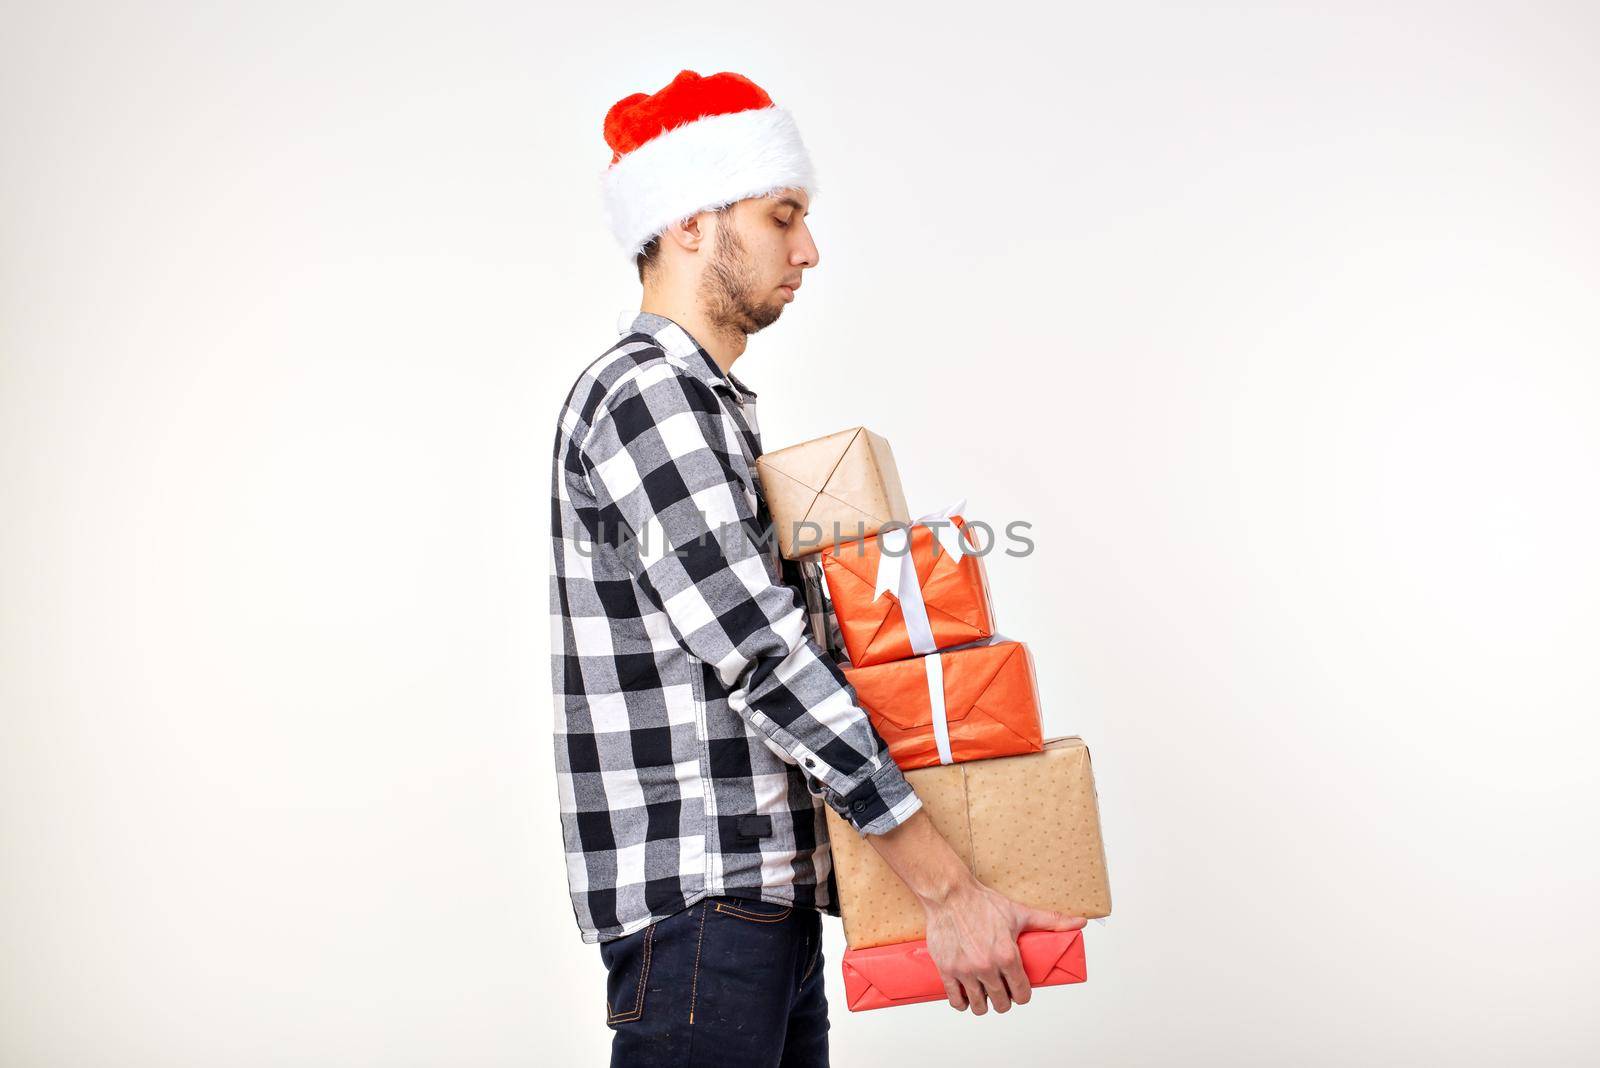 Holidays and presents concept - Funny man in Christmas hat holding many gift boxes on white background.